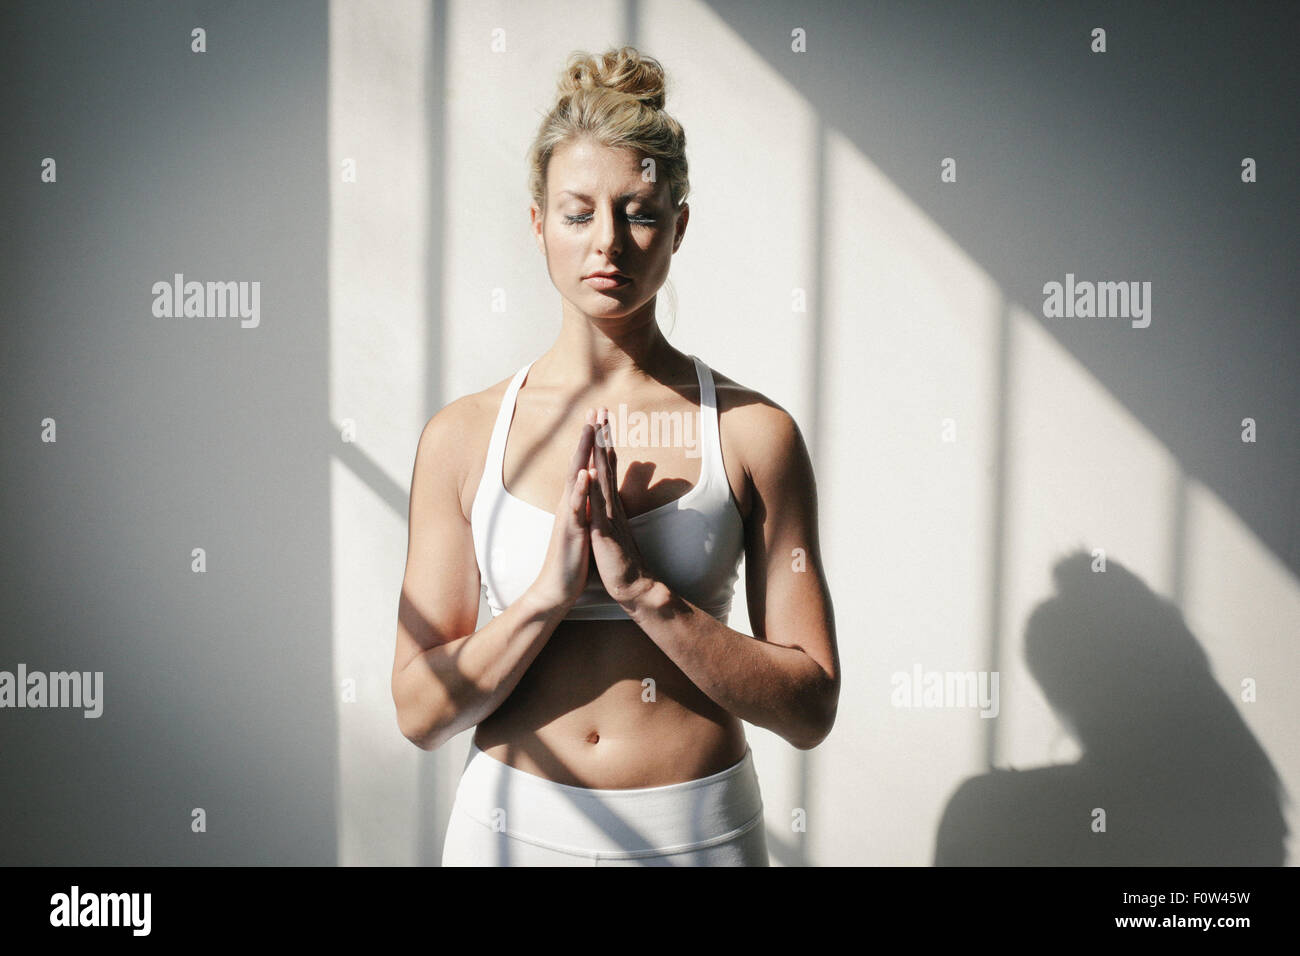 A blonde woman, her eyes closed, in a white crop top and leggings, standing in front of a white wall, doing yoga. Stock Photo